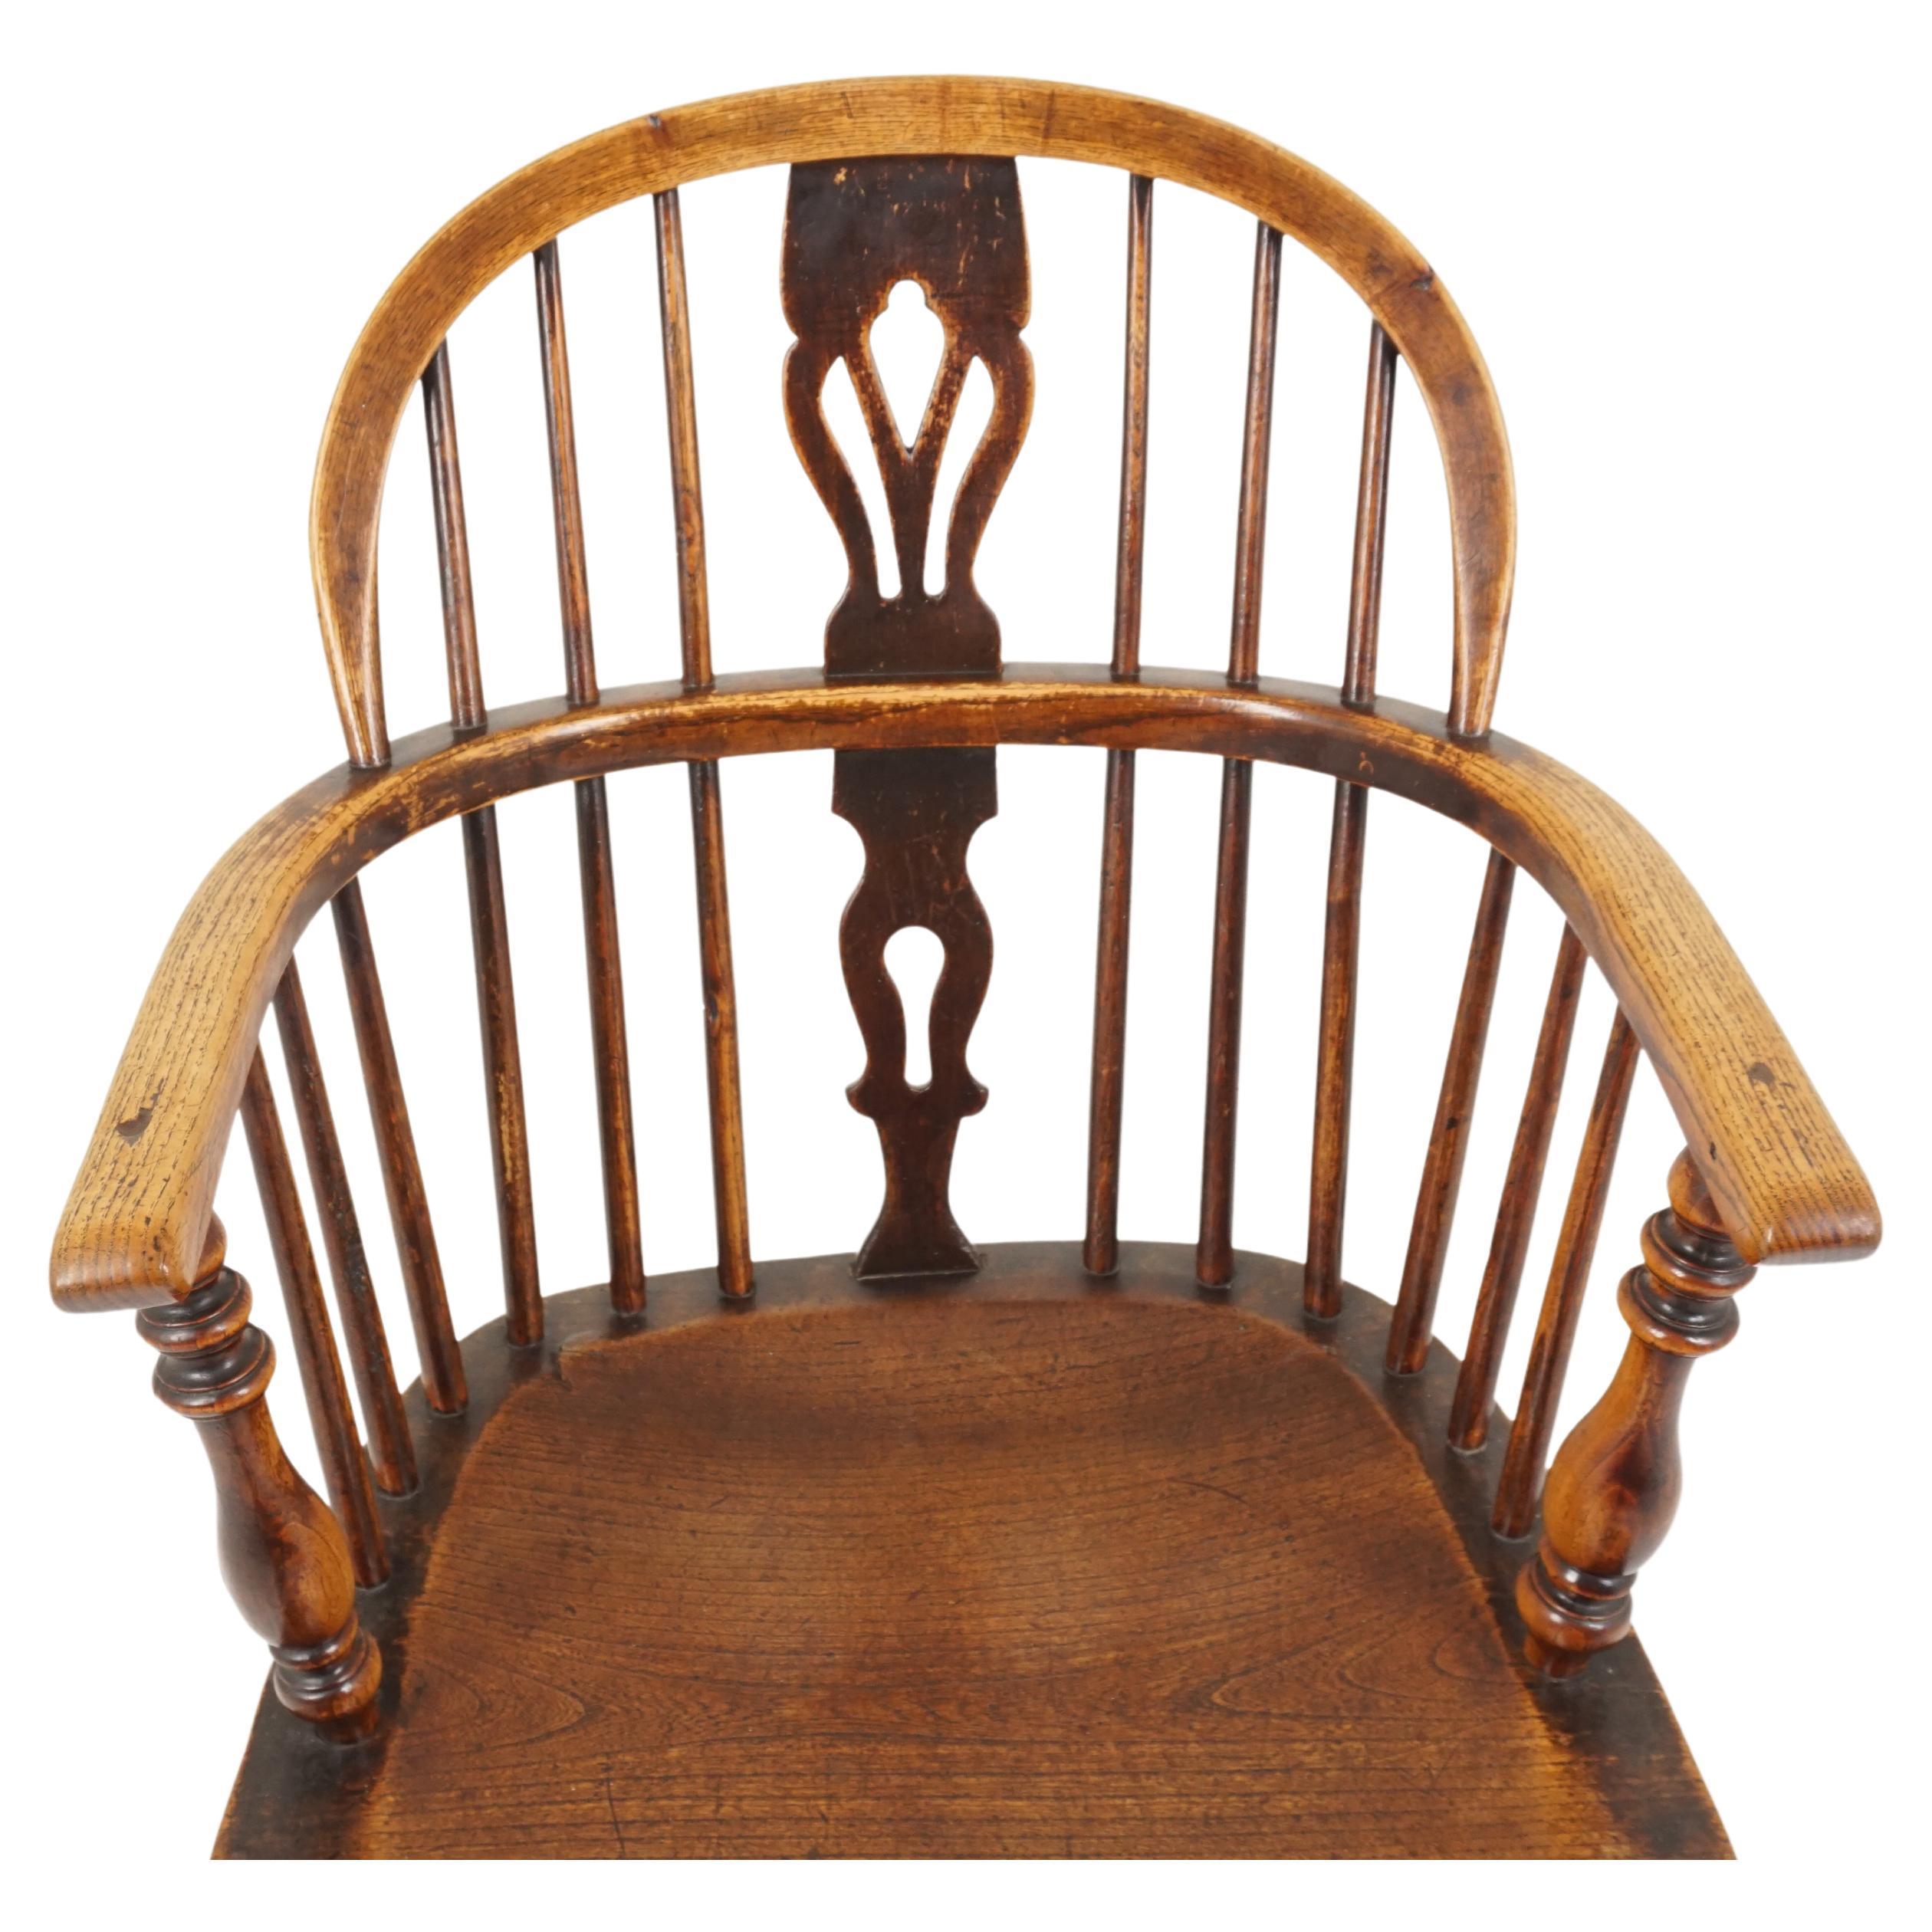 Mid-19th Century Antique Windsor Arm Chair, Country Chair, Elm + Yew, Scotland 1850, H542